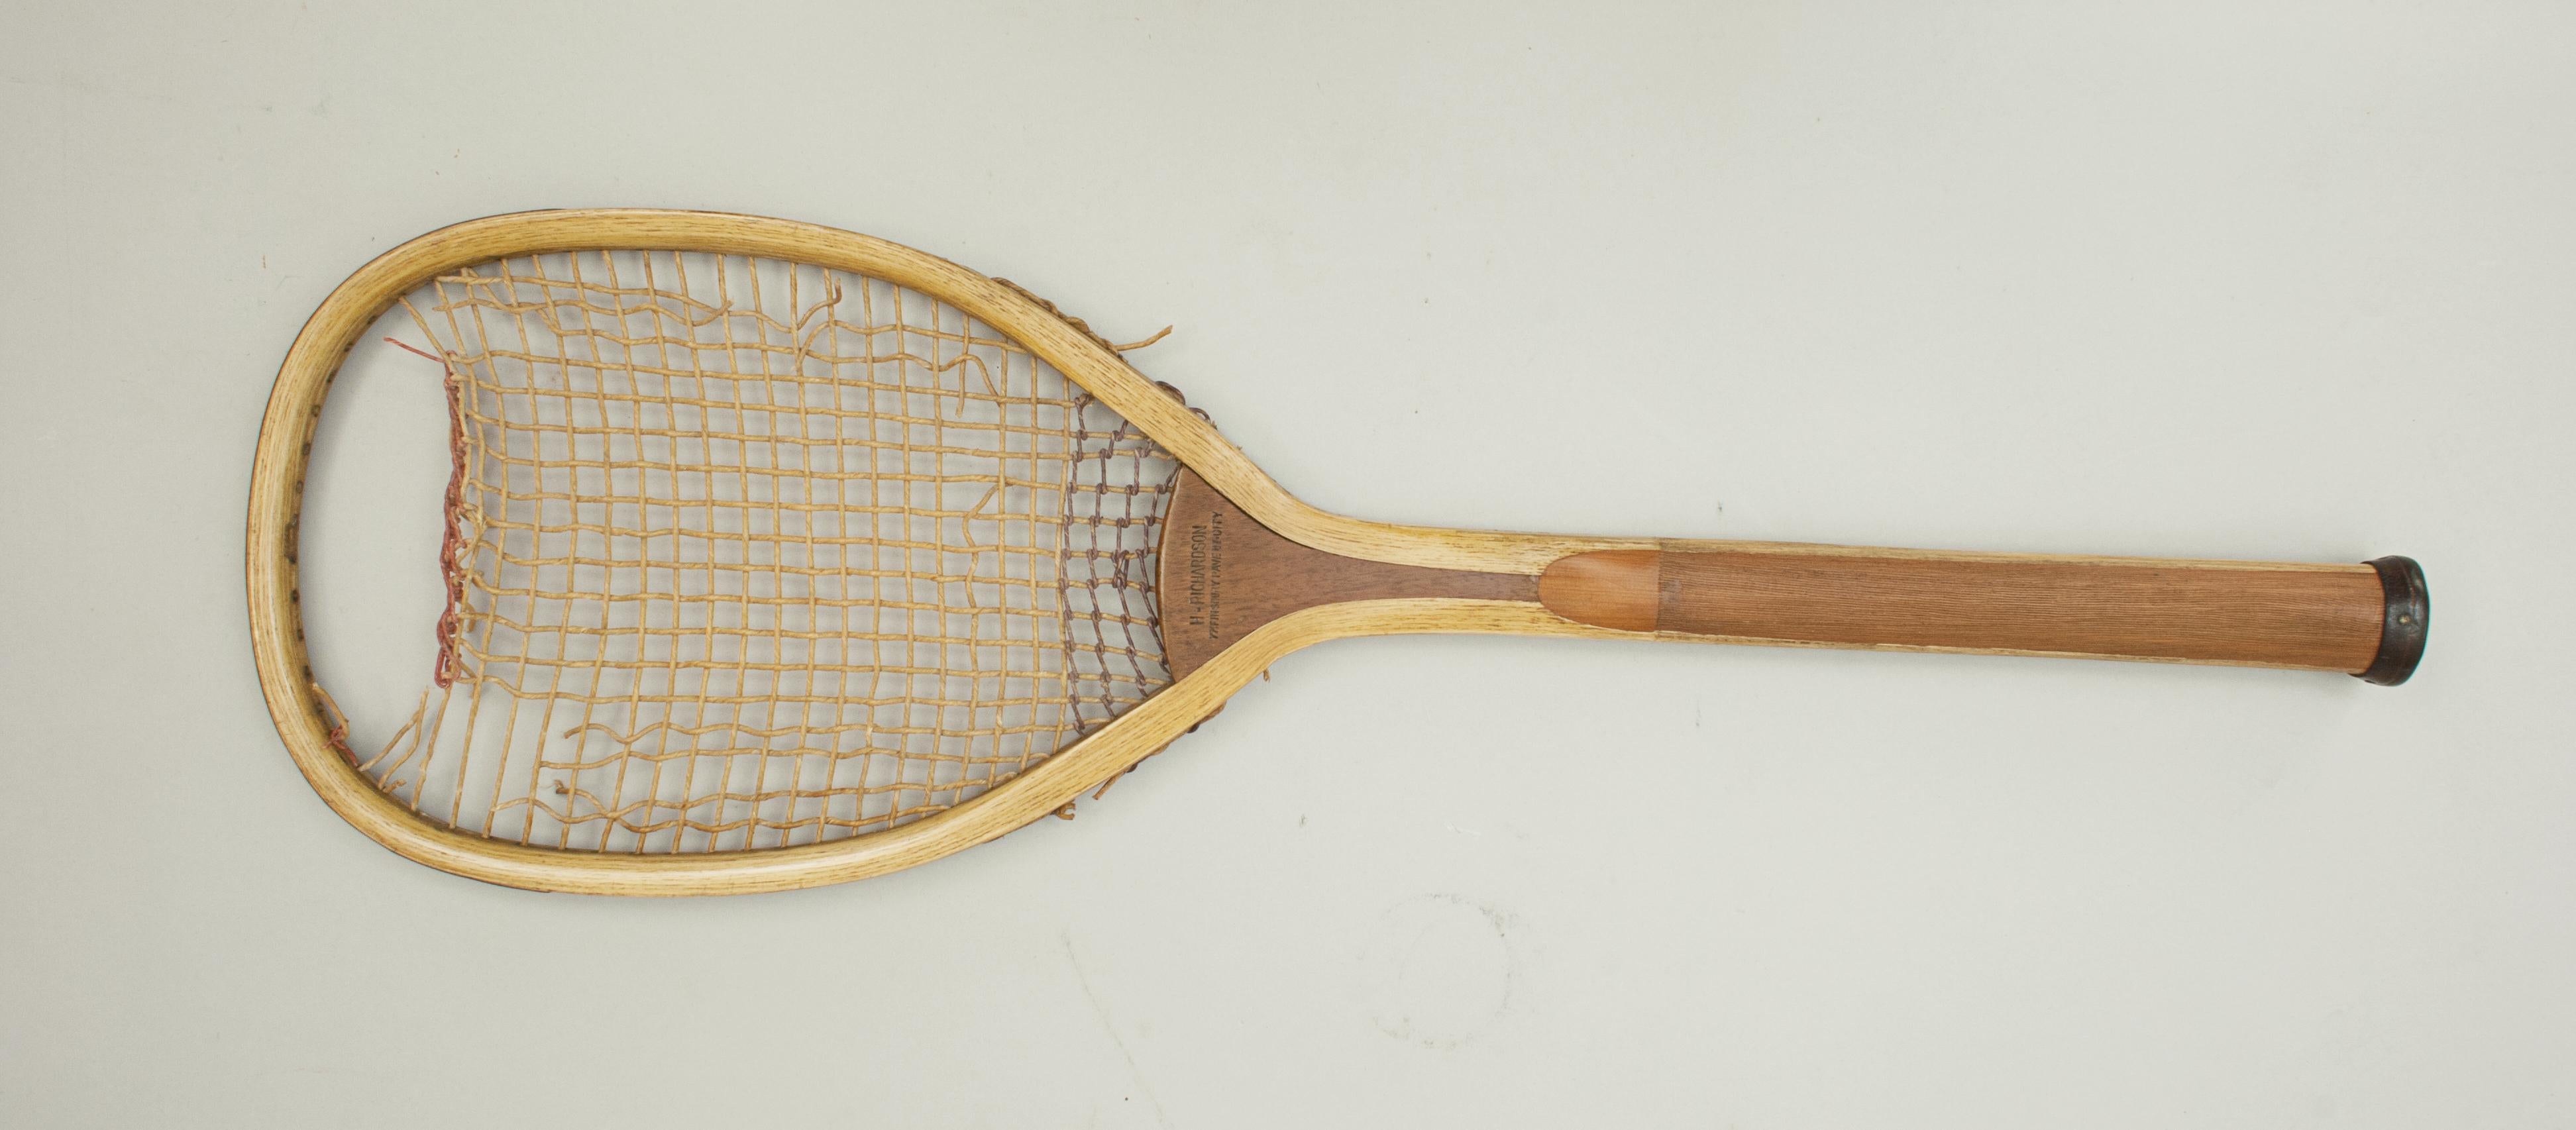 Pair of Early H. Richardson Lawn Tennis Rackets 8